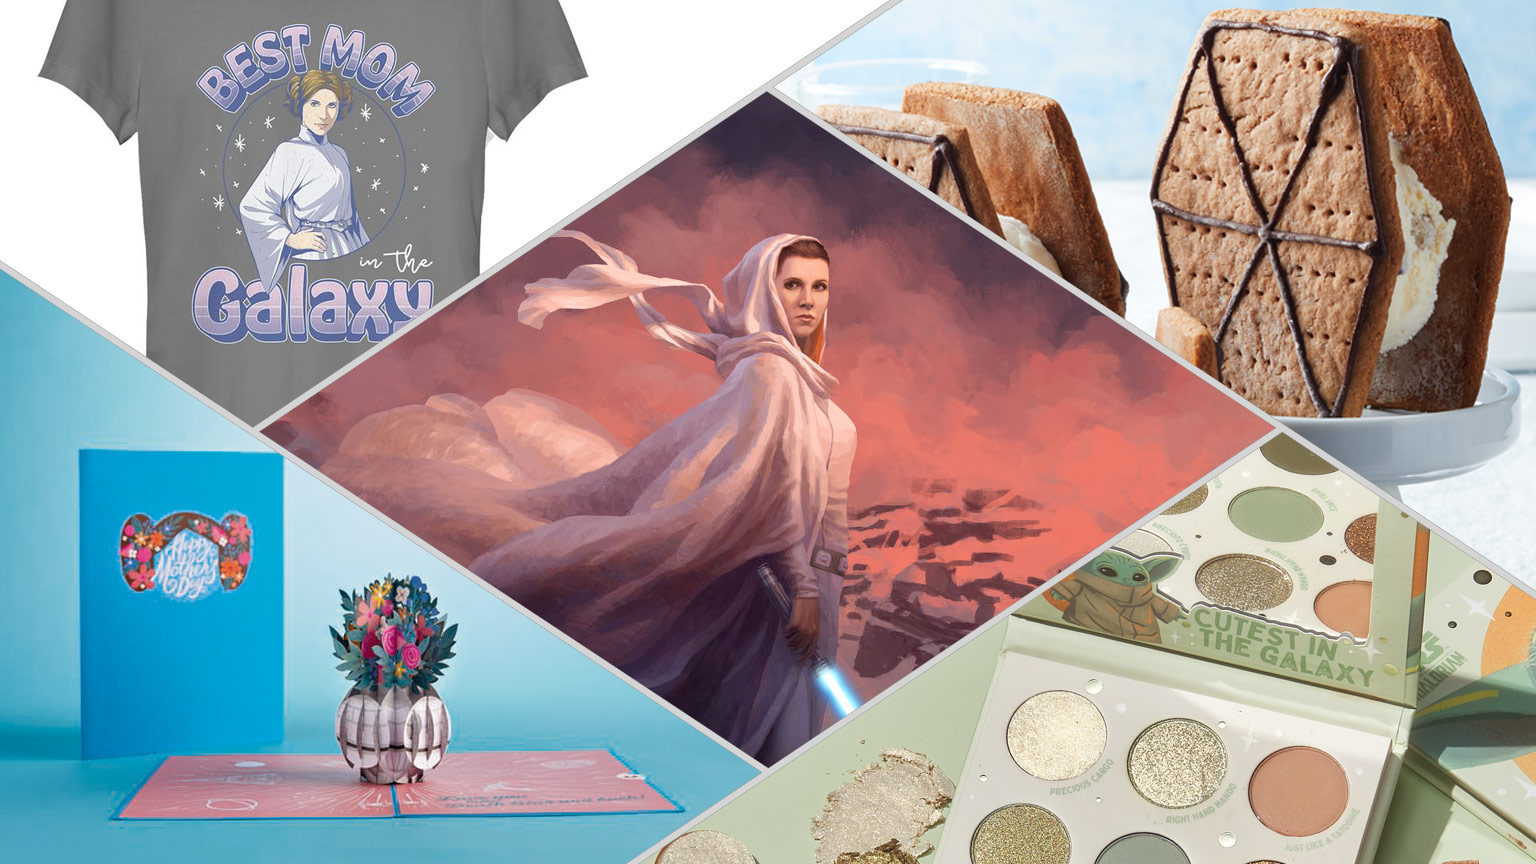 Star Wars Mother’s Day Gift Guide 2021